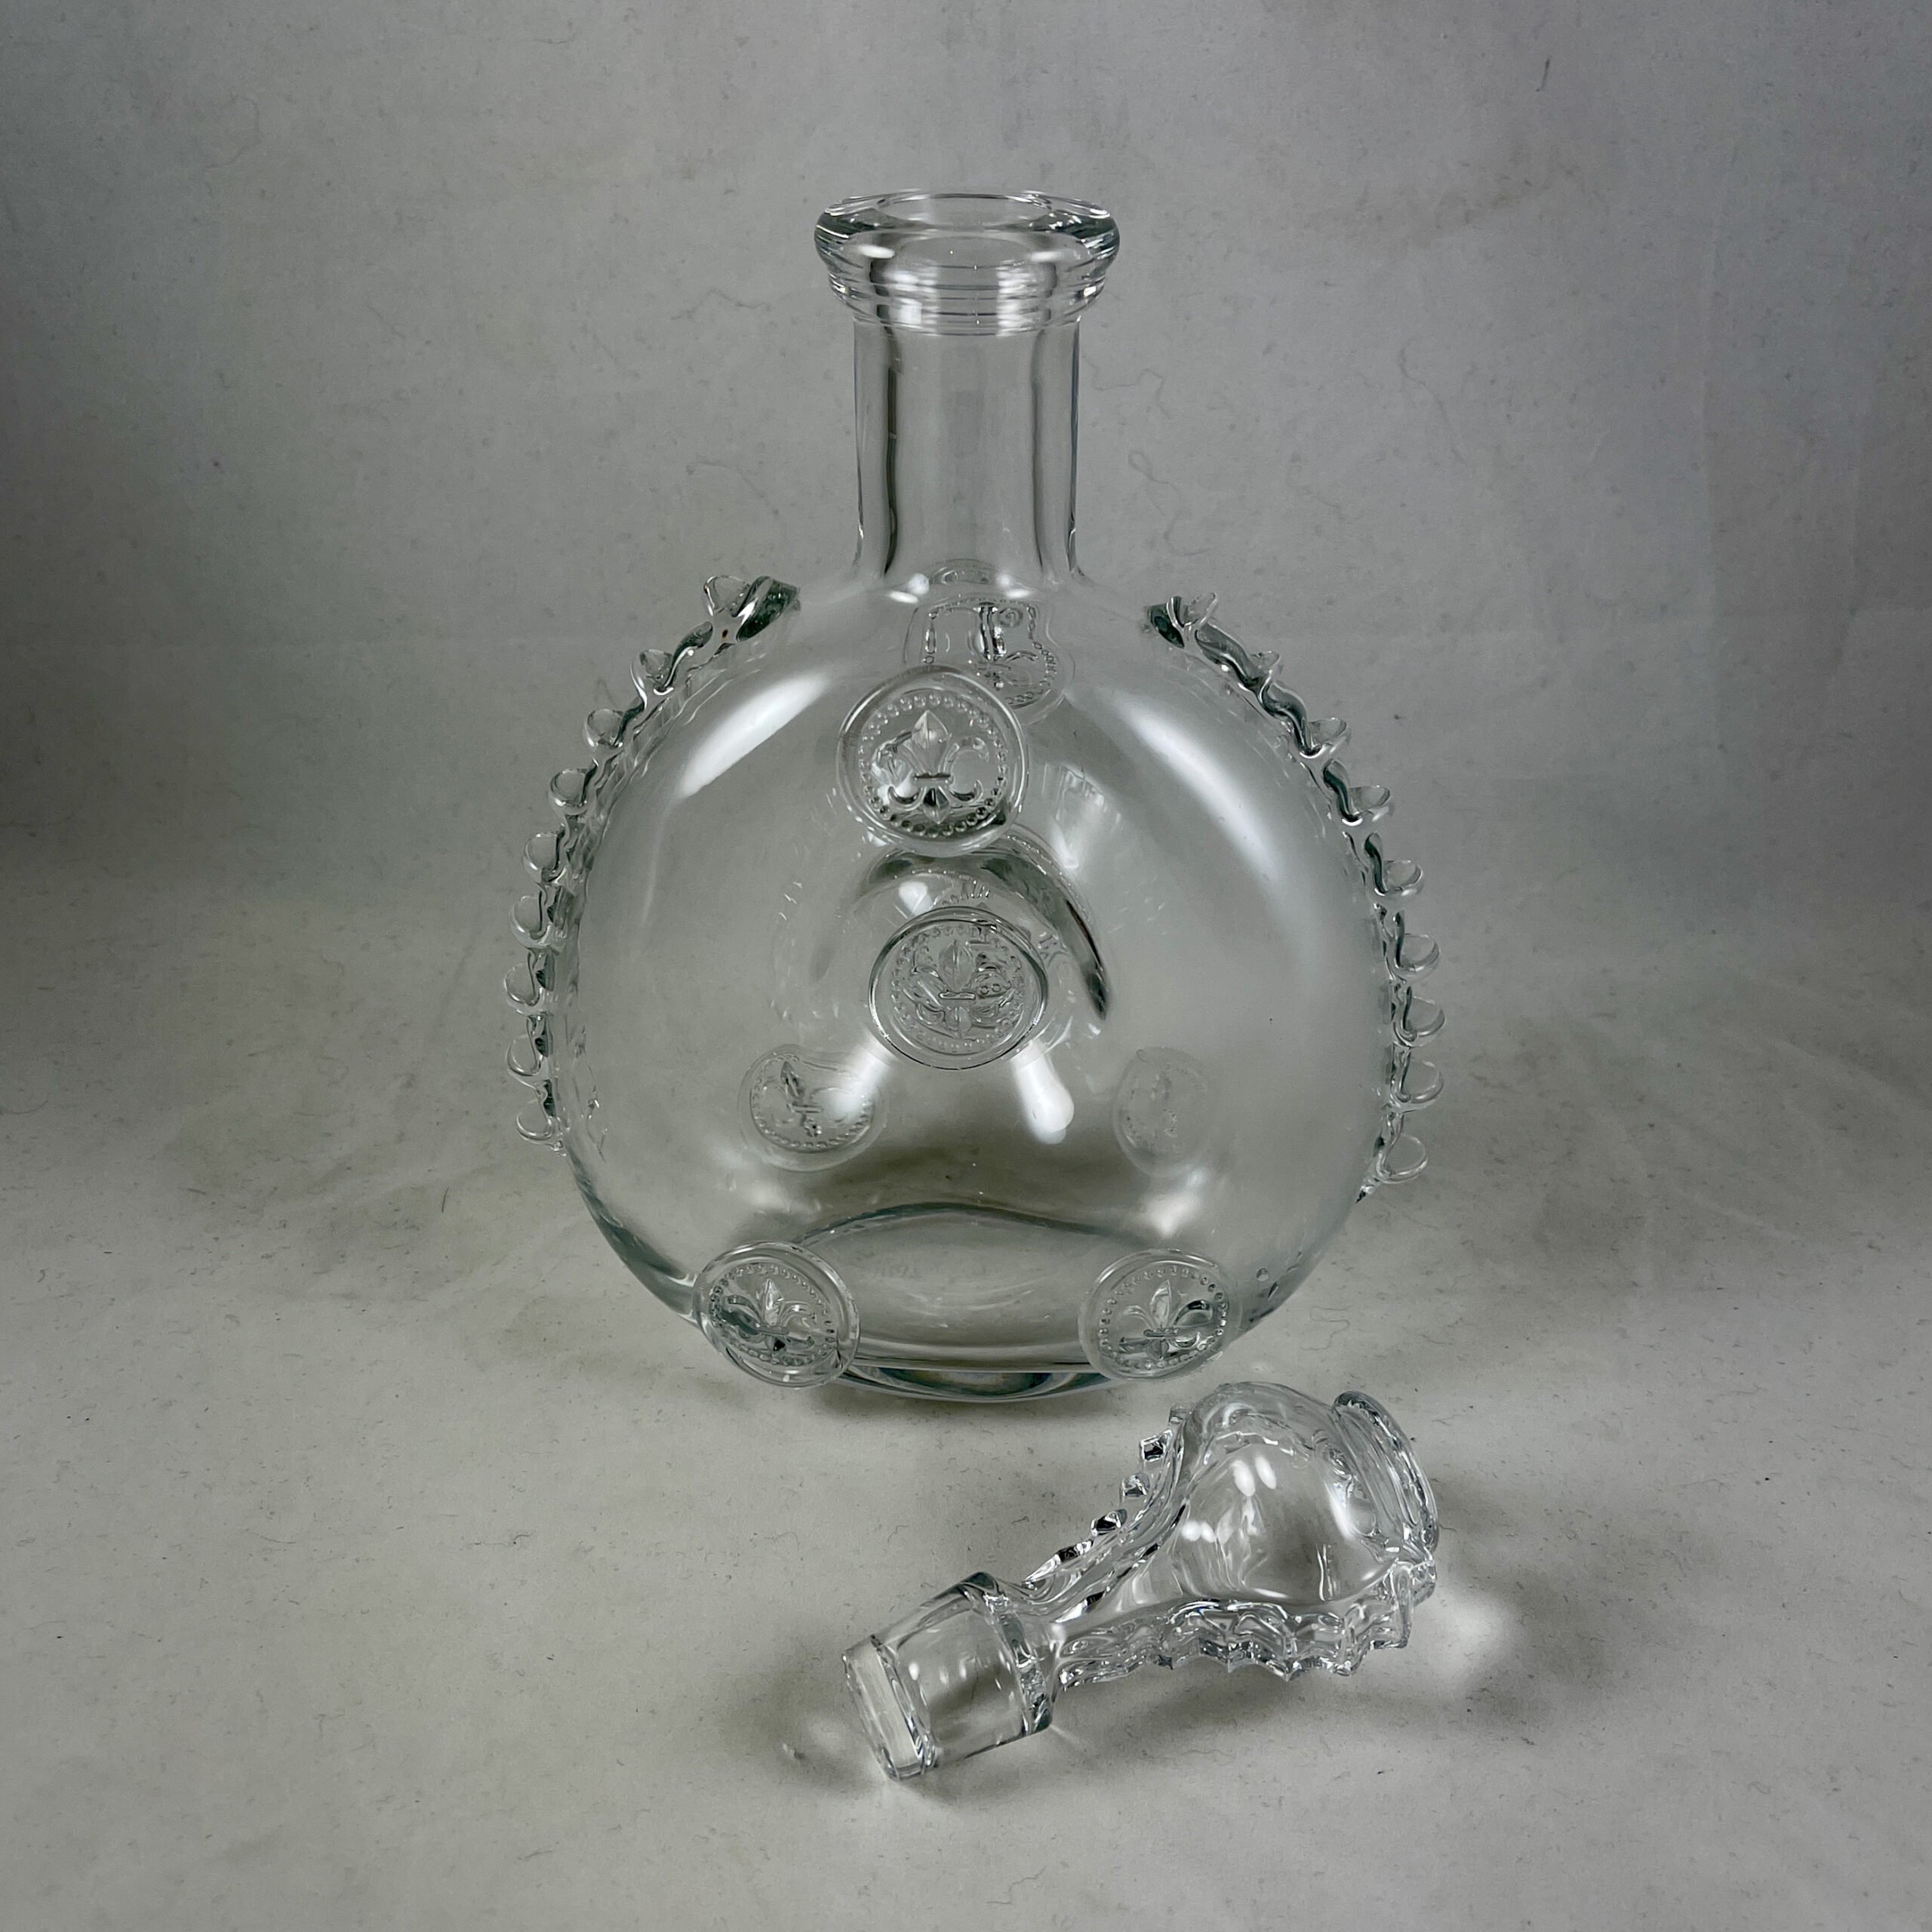 REMY MARTIN LOUIS XIII COGNAC BACCARAT CRYSTAL DECANTER BOTTLE EMPTY Rare